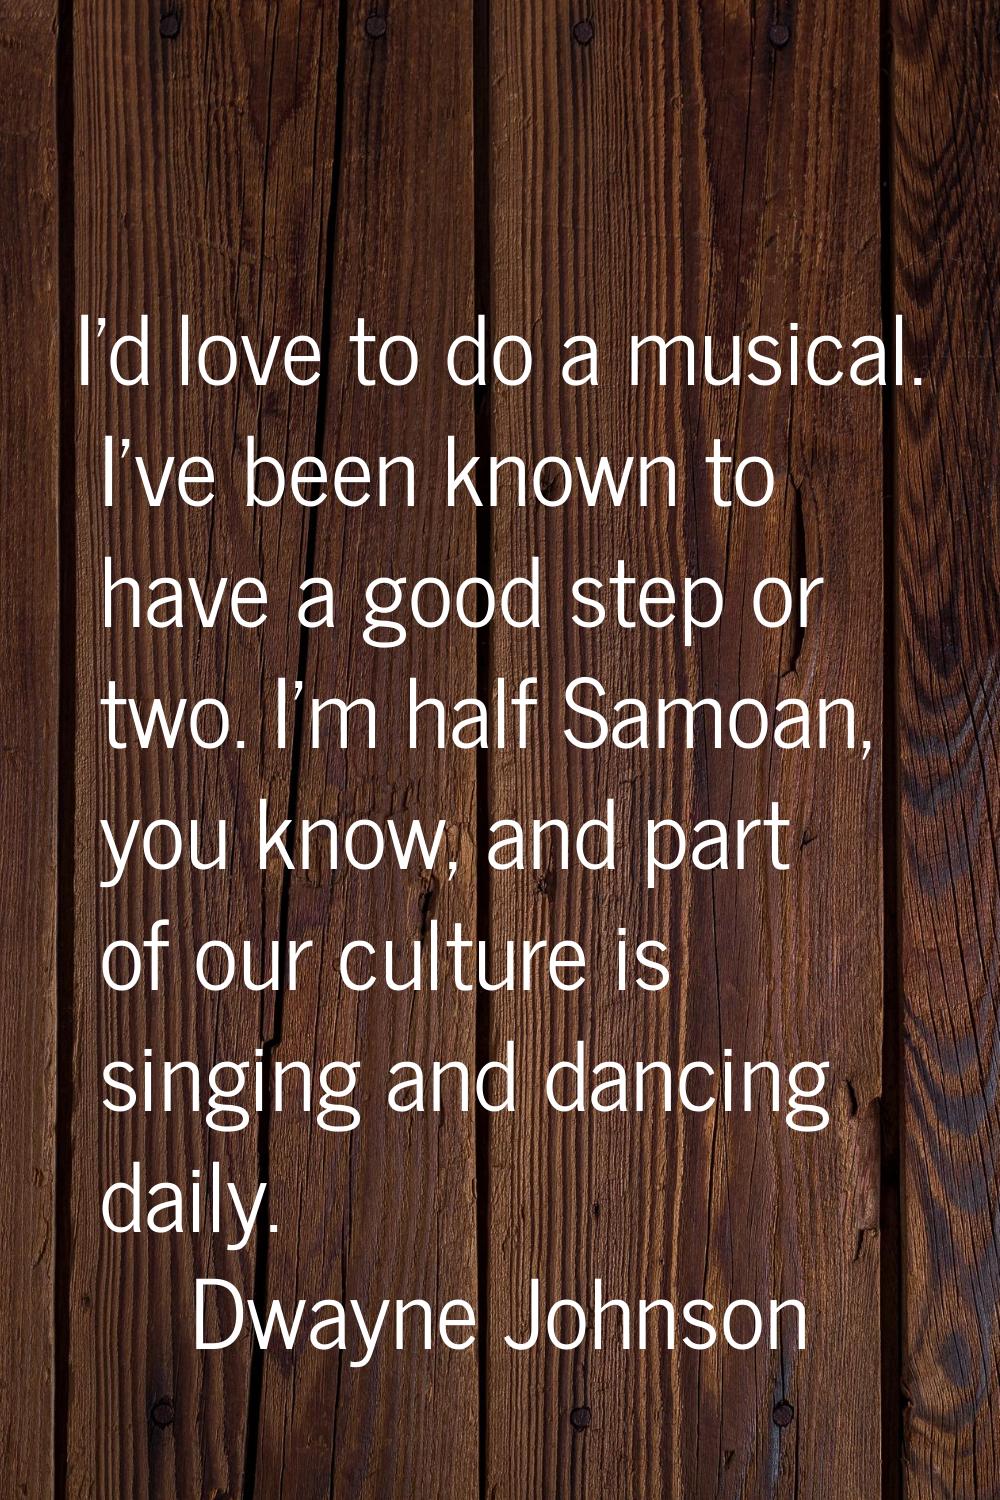 I'd love to do a musical. I've been known to have a good step or two. I'm half Samoan, you know, an